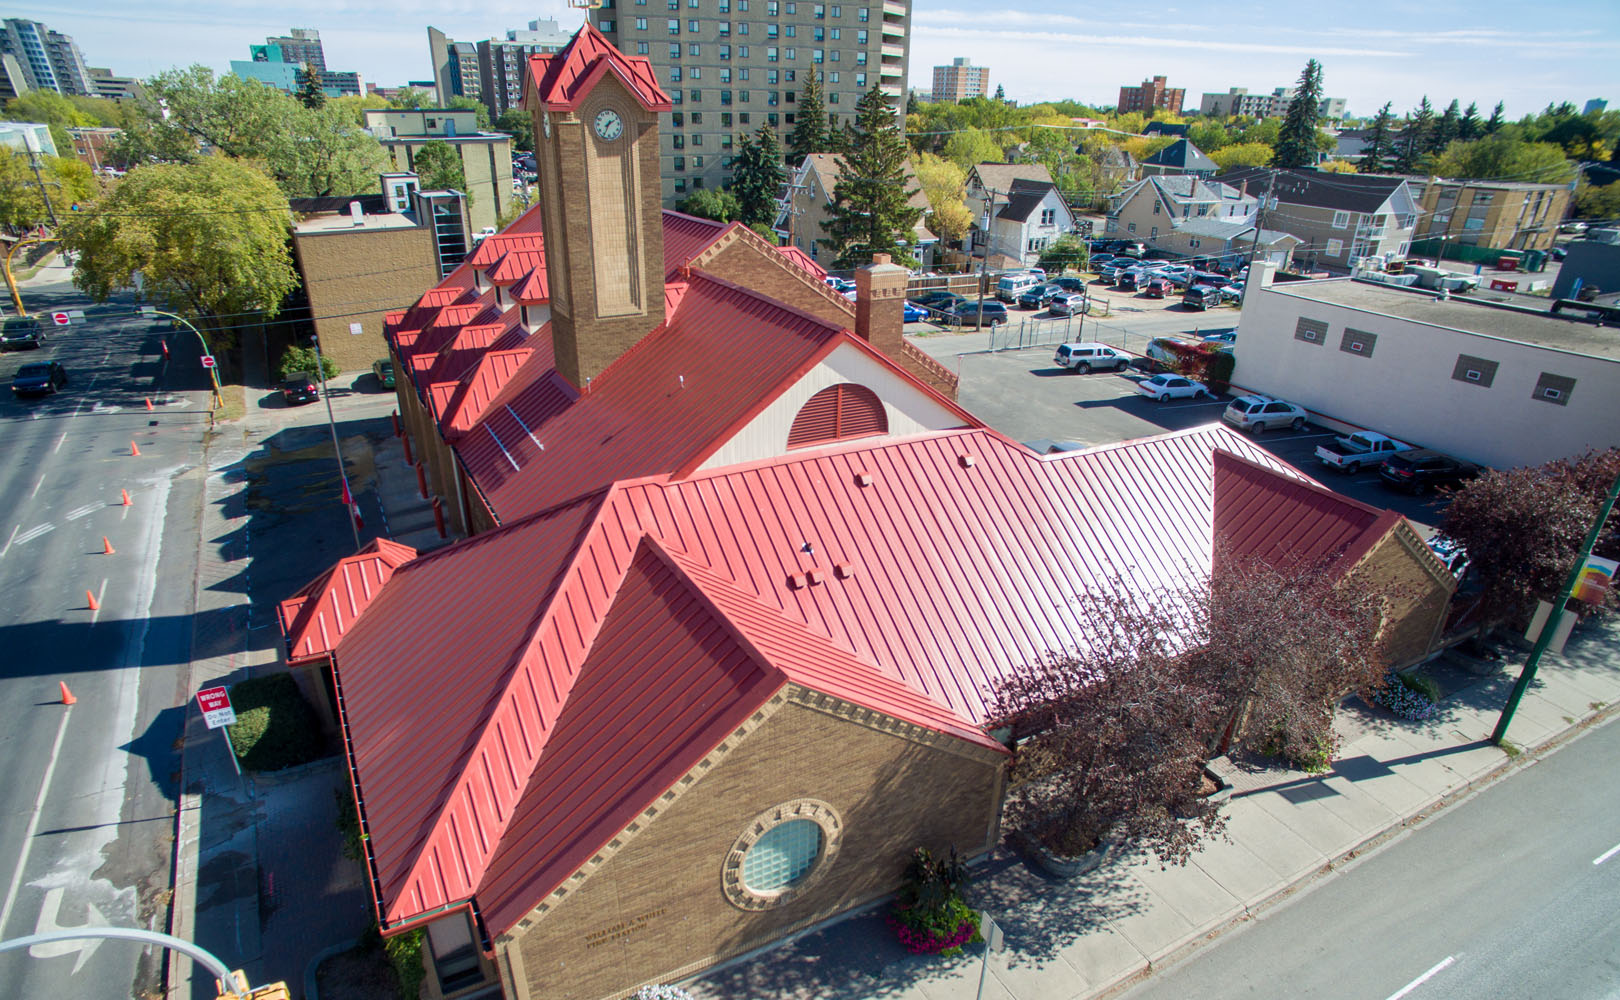 Commercial metal roof - Regina fire house by Flynn